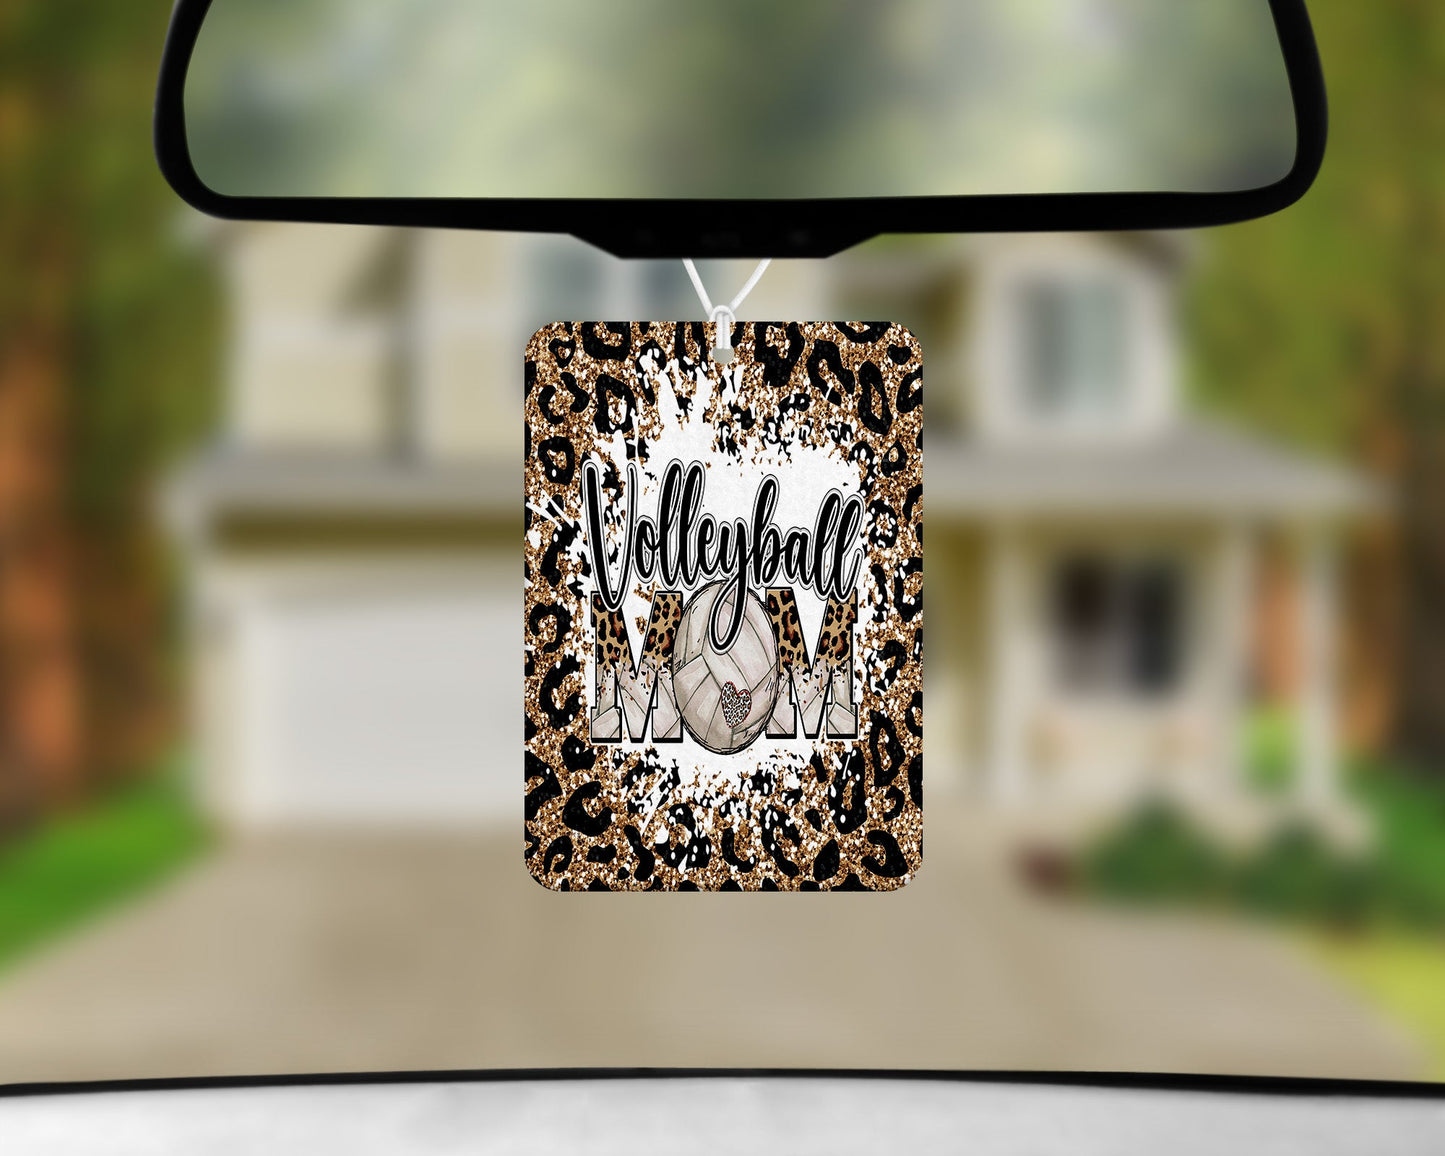 Volleyball Mom Leopard Print|Freshie|Includes Scent Bottle - Vehicle Air Freshener